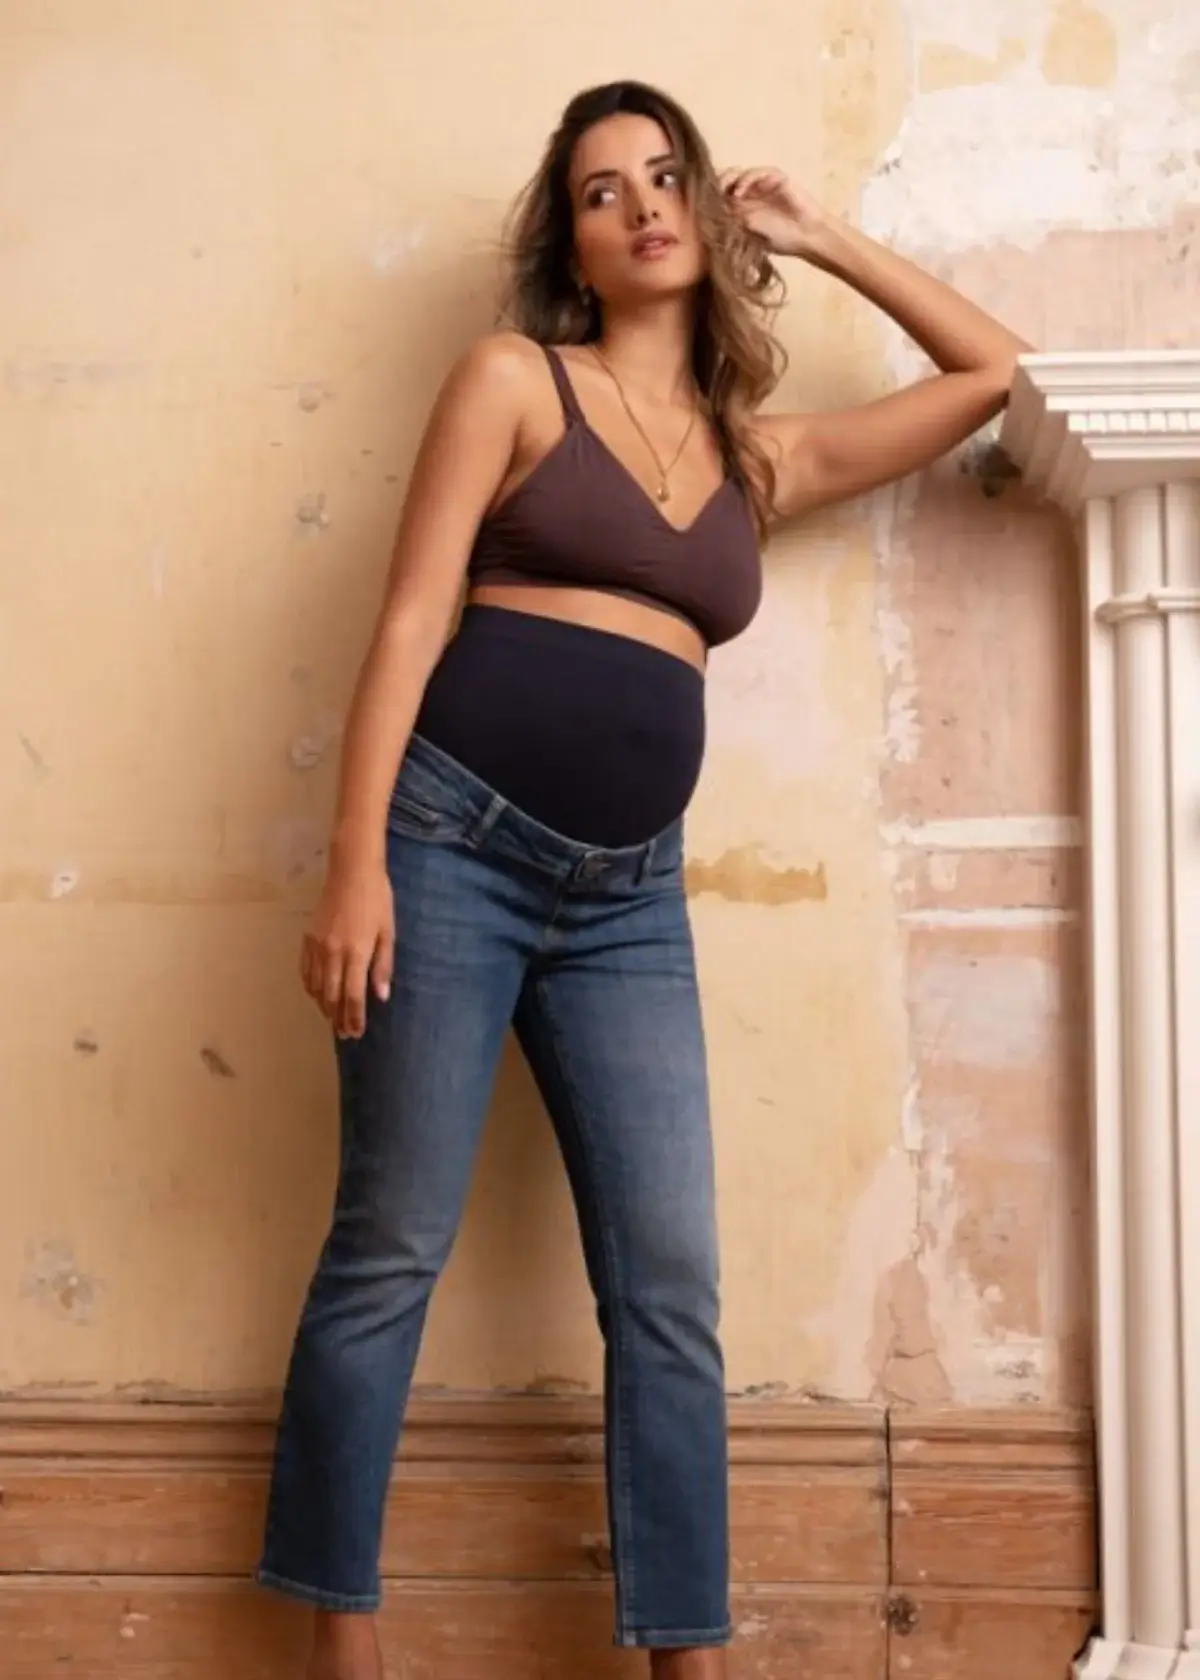 How to choose the right maternity jeans?